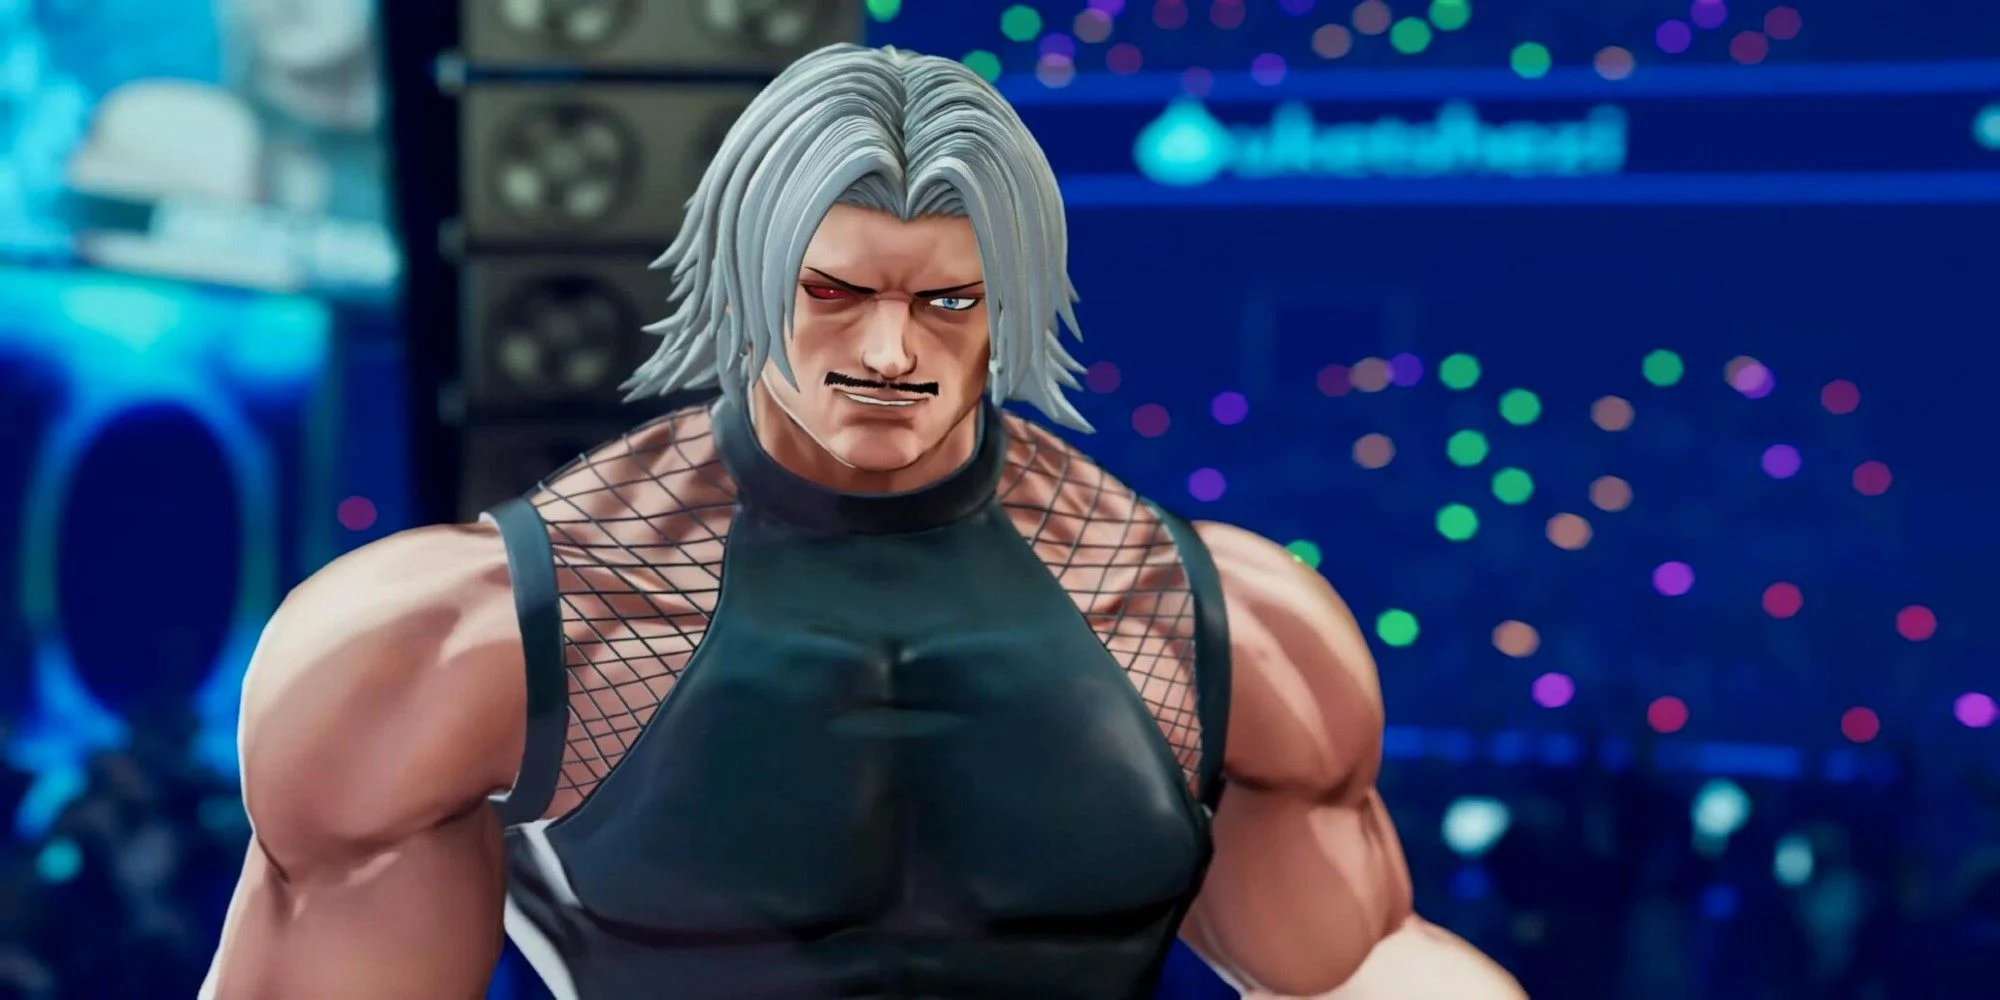 King Of Fighters Omega Rugal